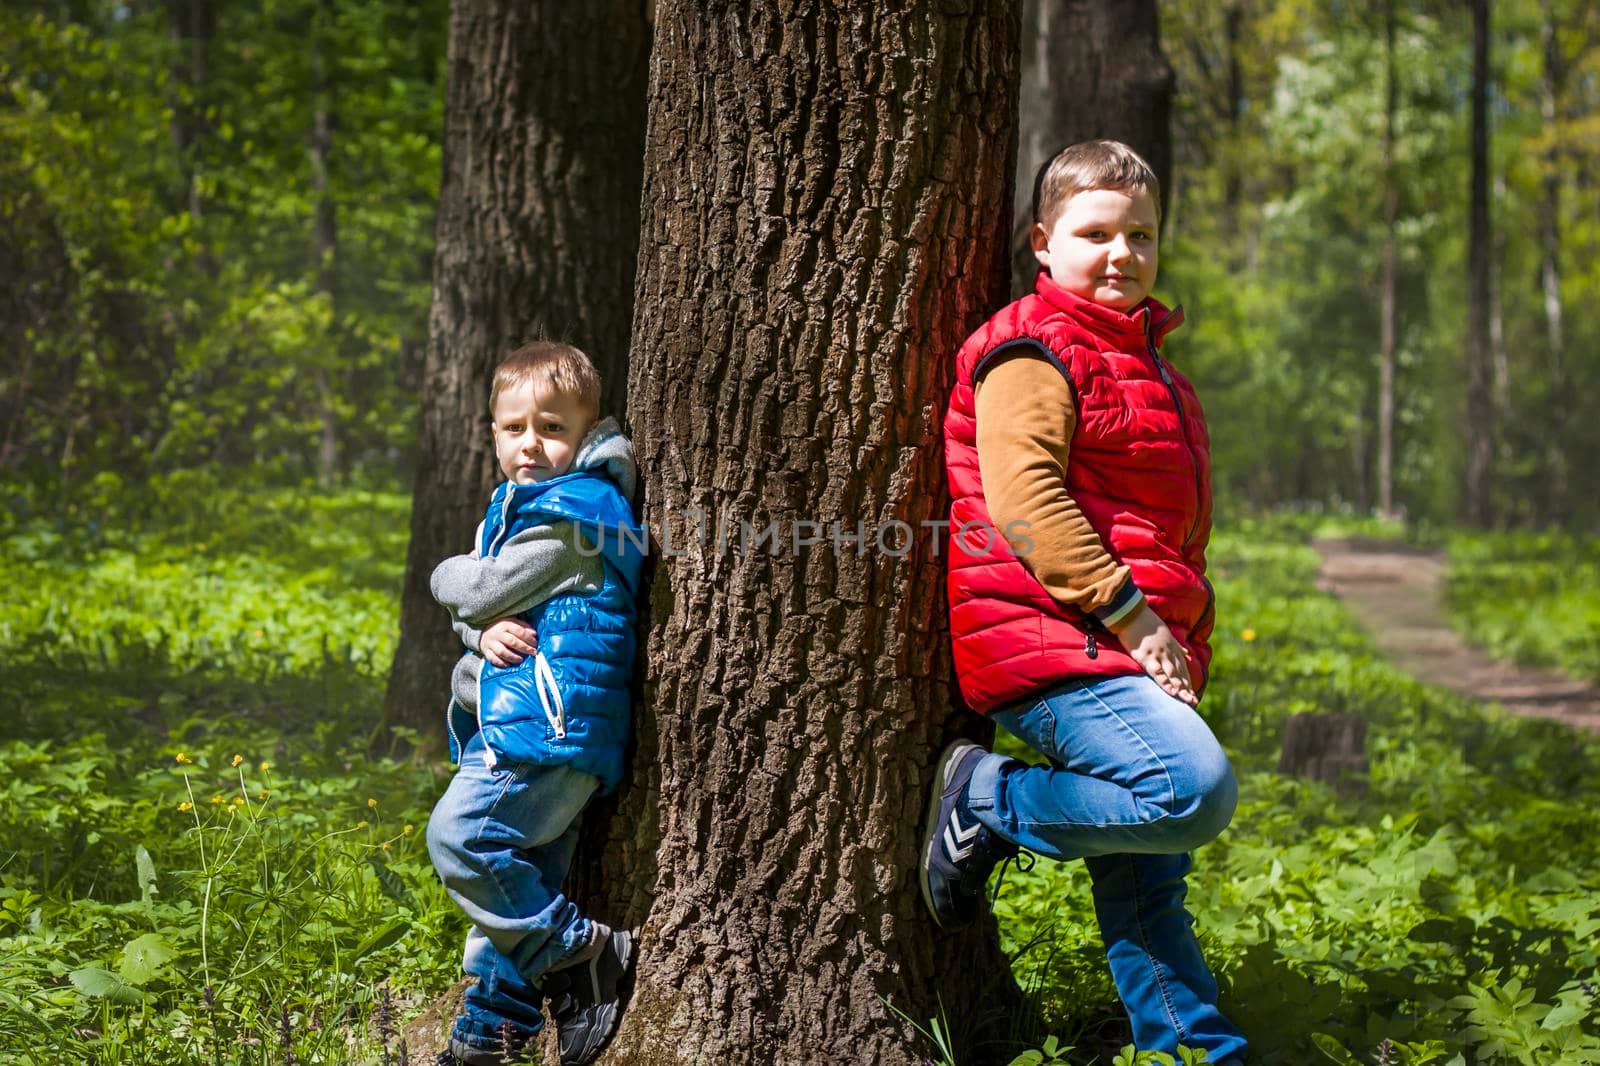 Two brothers in the forest in the spring. Interaction of children. Take a walk in the green park in the fresh air. The magical light from the sun's rays falls behind. Spring